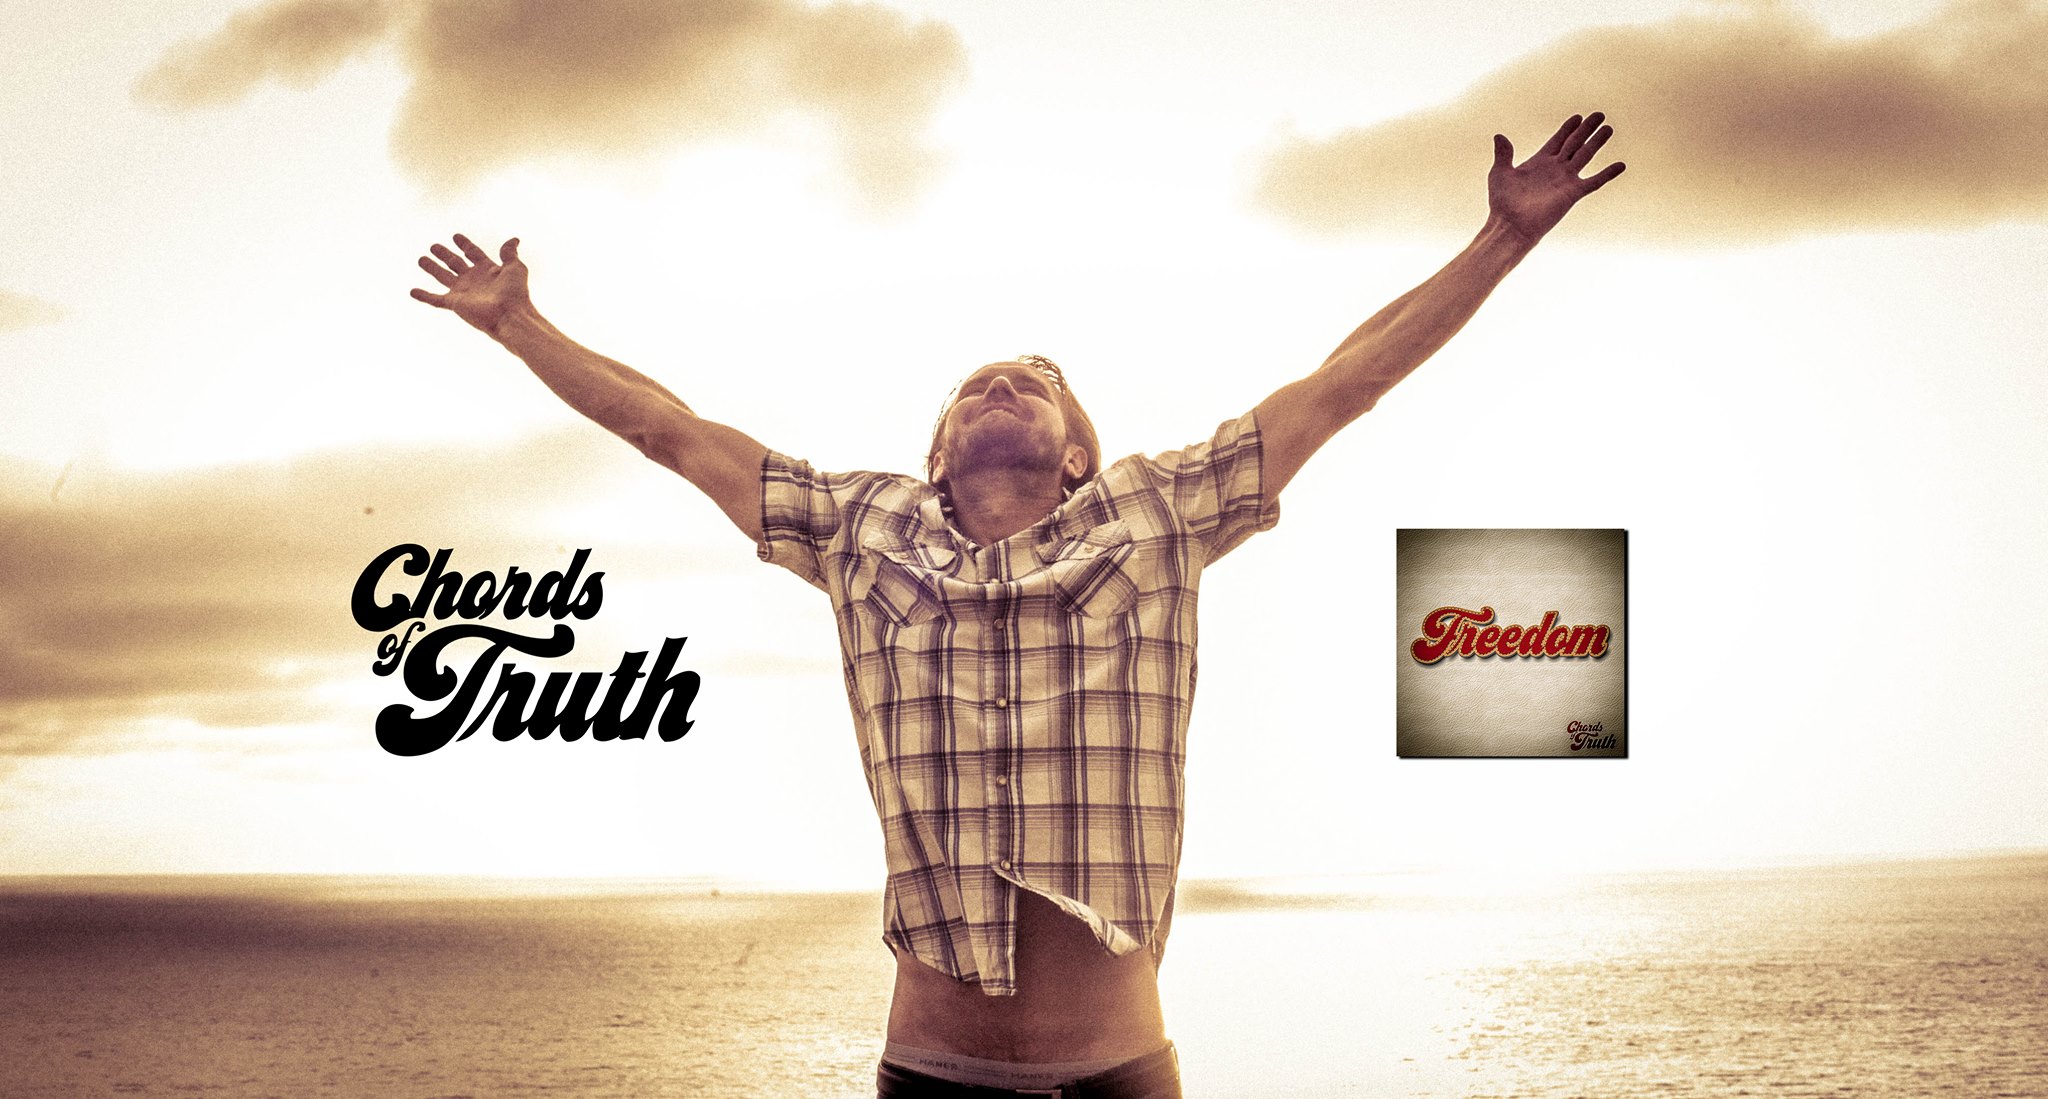  Chords Of Truth – “Freedom”